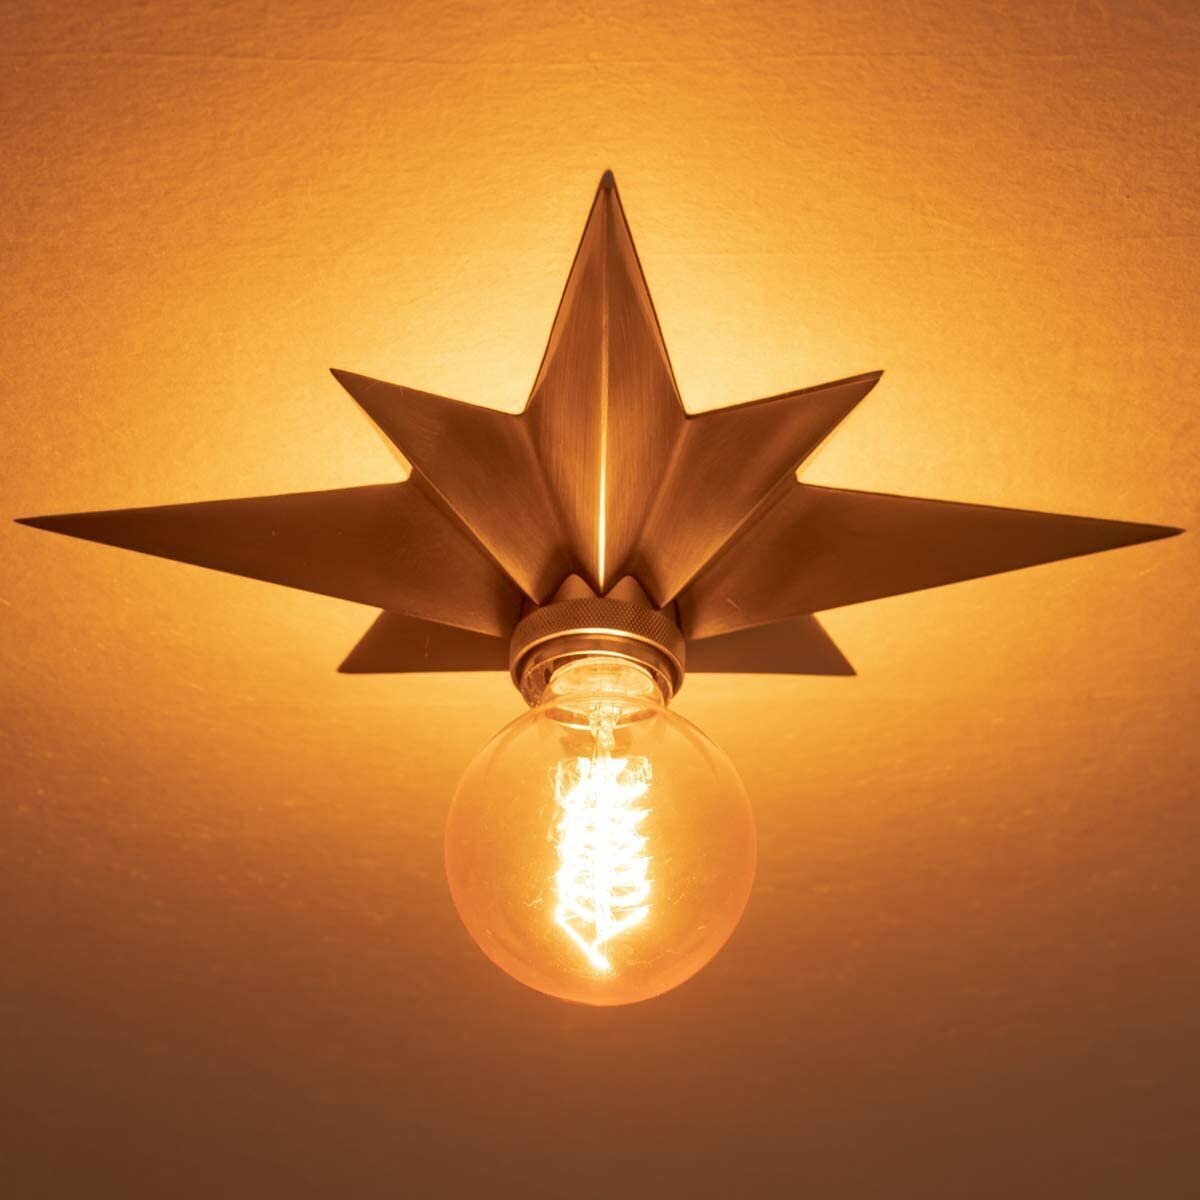 Large Globe Bulb and Star Ceiling Light Fixture